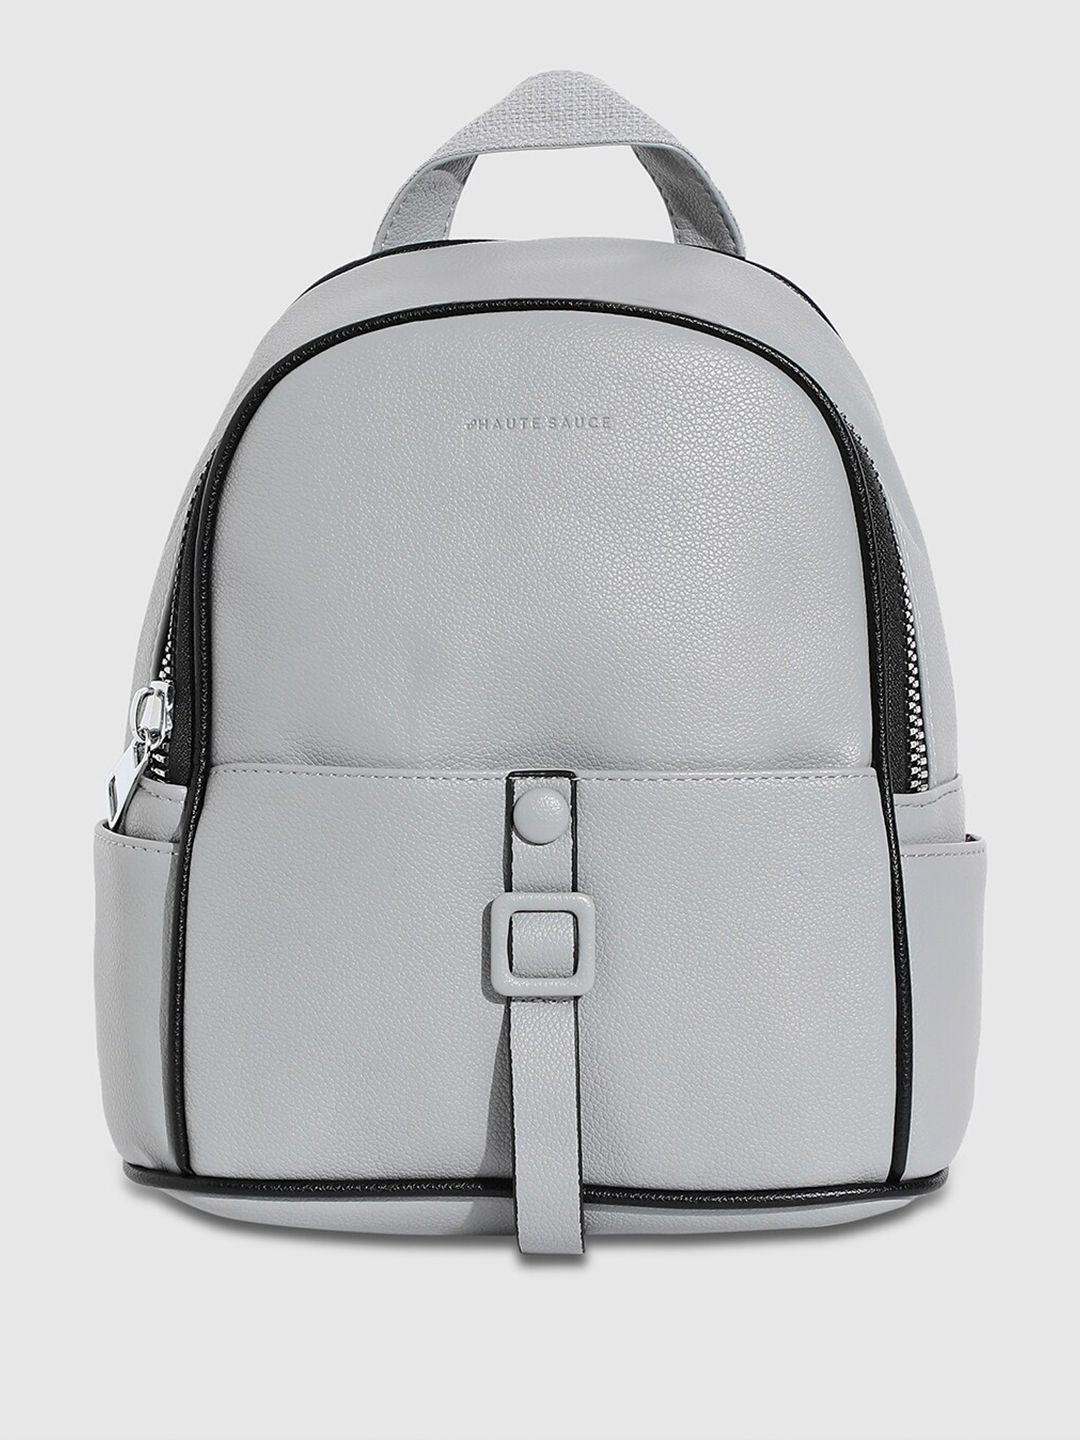 haute sauce by campus sutra women grey backpack